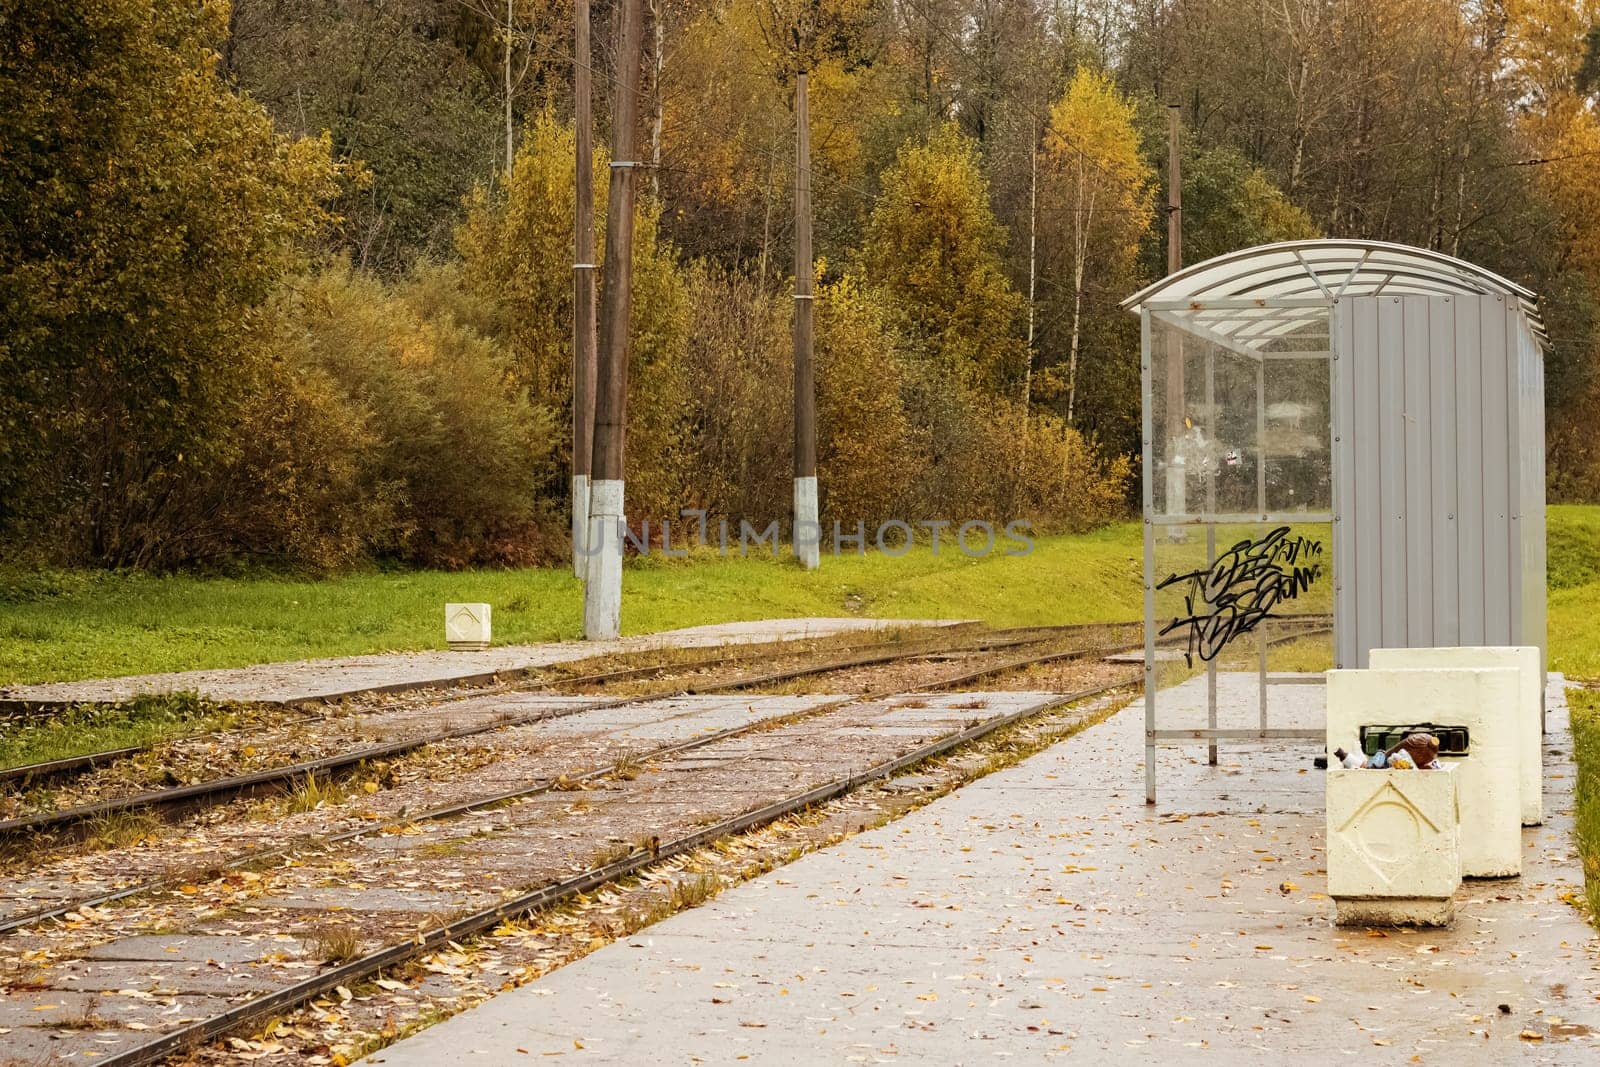 Tram rails and stop station in the autumn forest